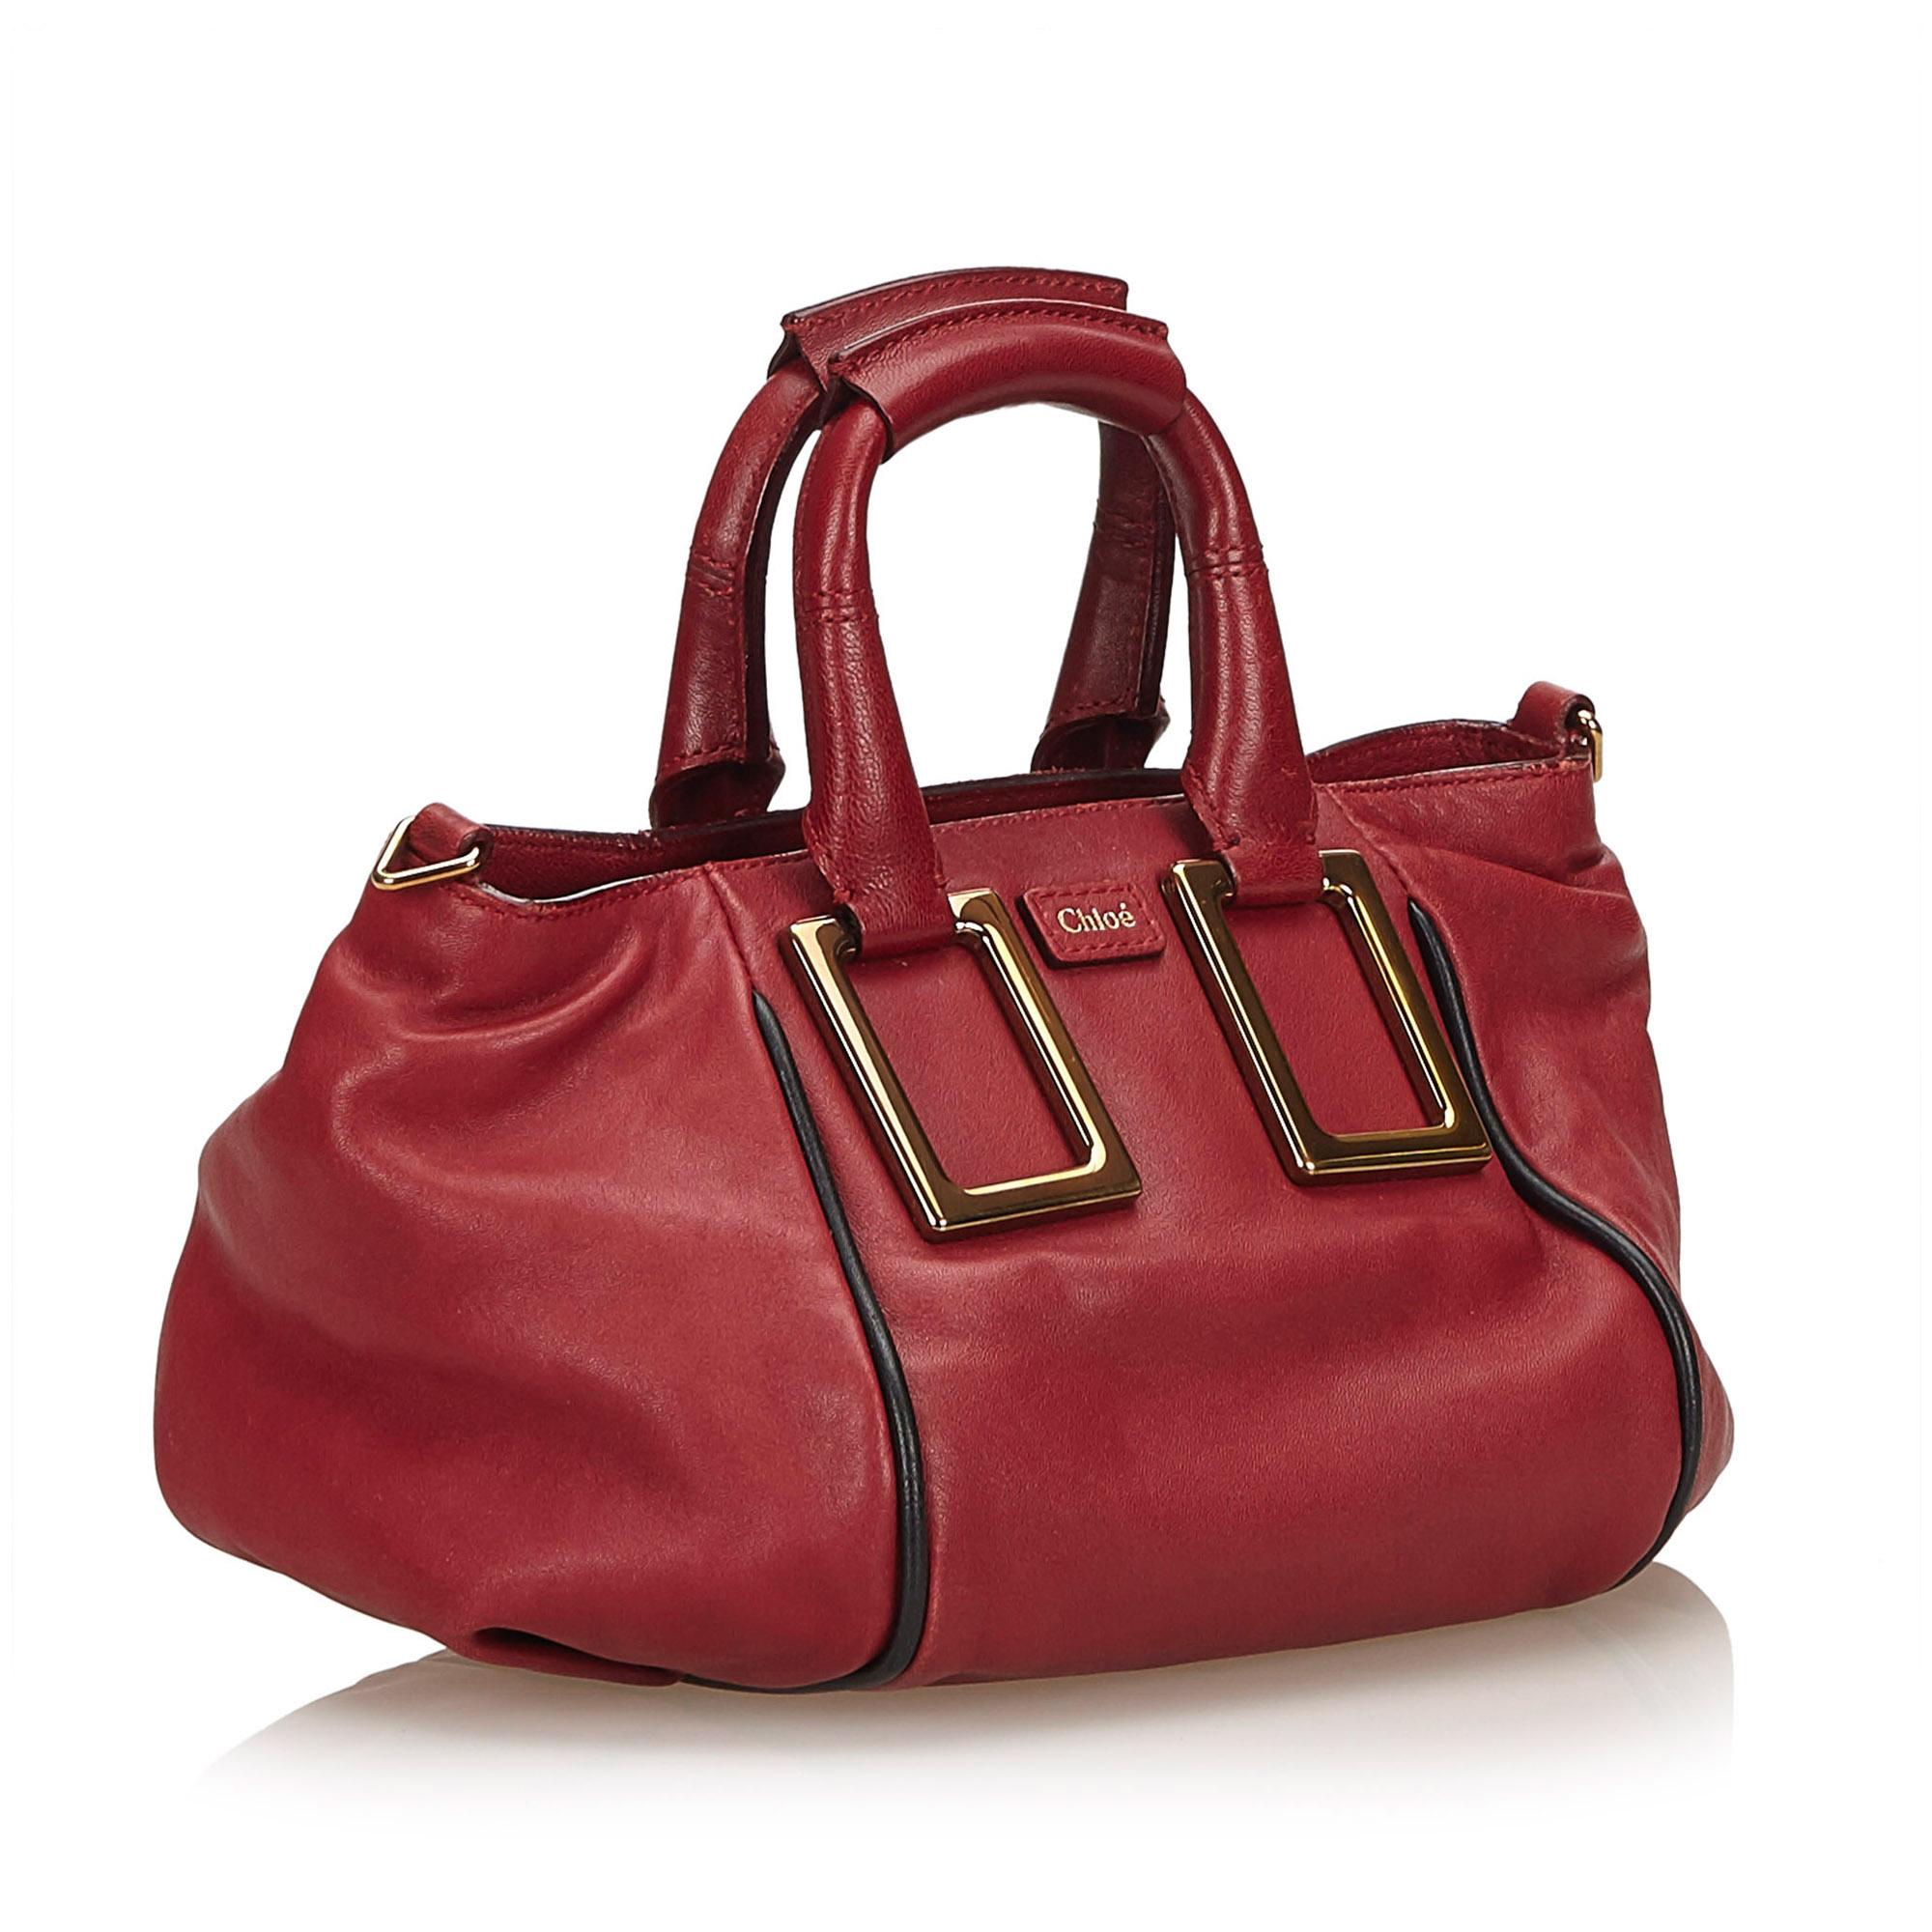 The Ethel features a leather body, rolled handles, detachable shoulder strap, top zip closure, and an interior slip pocket. It carries as B+ condition rating.

Inclusions: 
This item does not come with inclusions.

Dimensions:
Length: 14.00